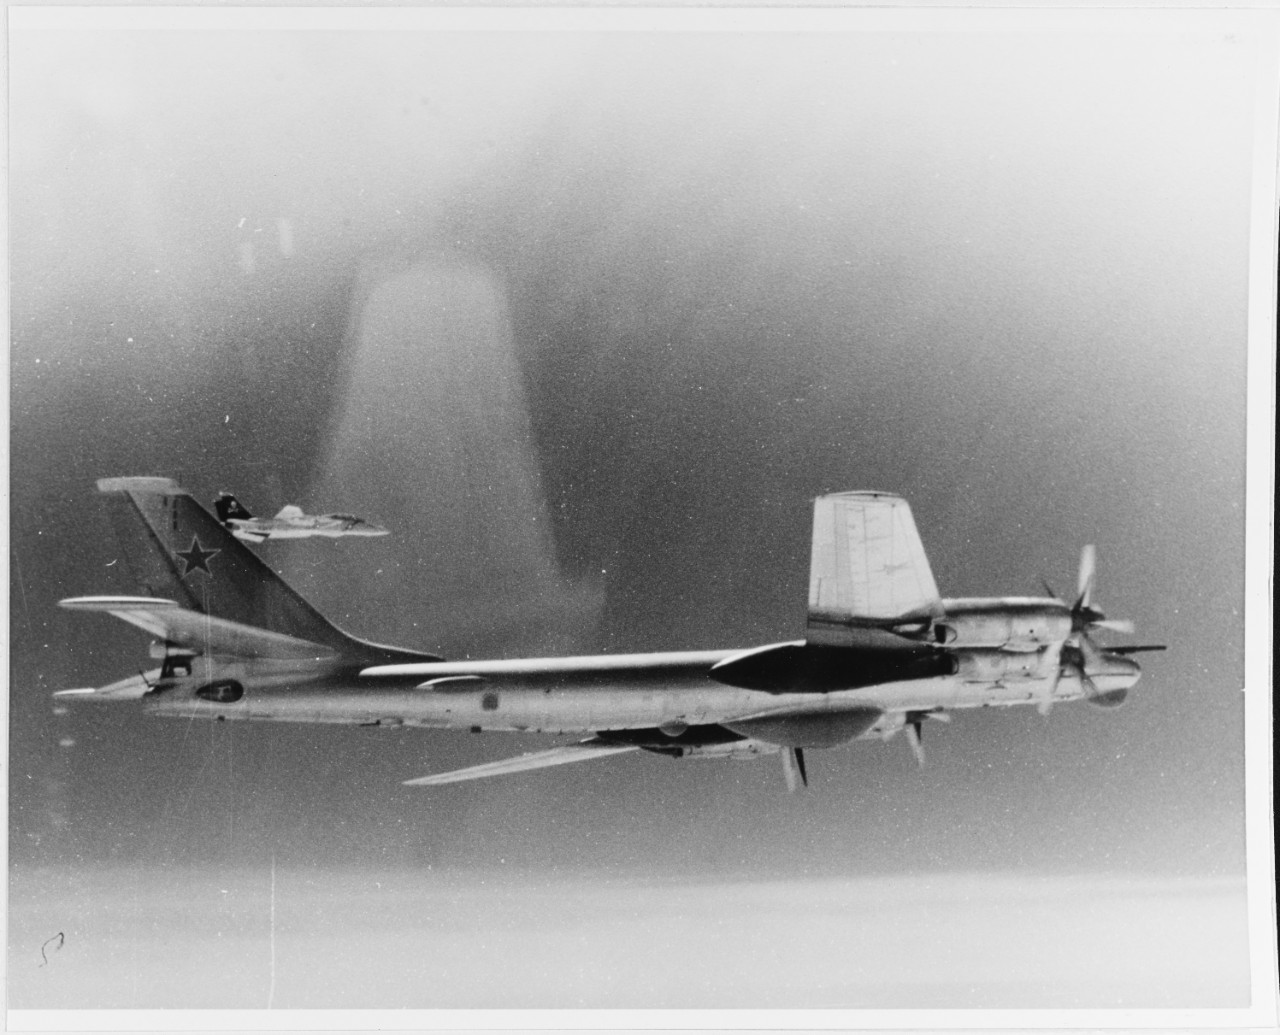 Soviet TU-95 "Bear" is escorted by a VF-84 F-14 fighter over the Mediterranean Sea